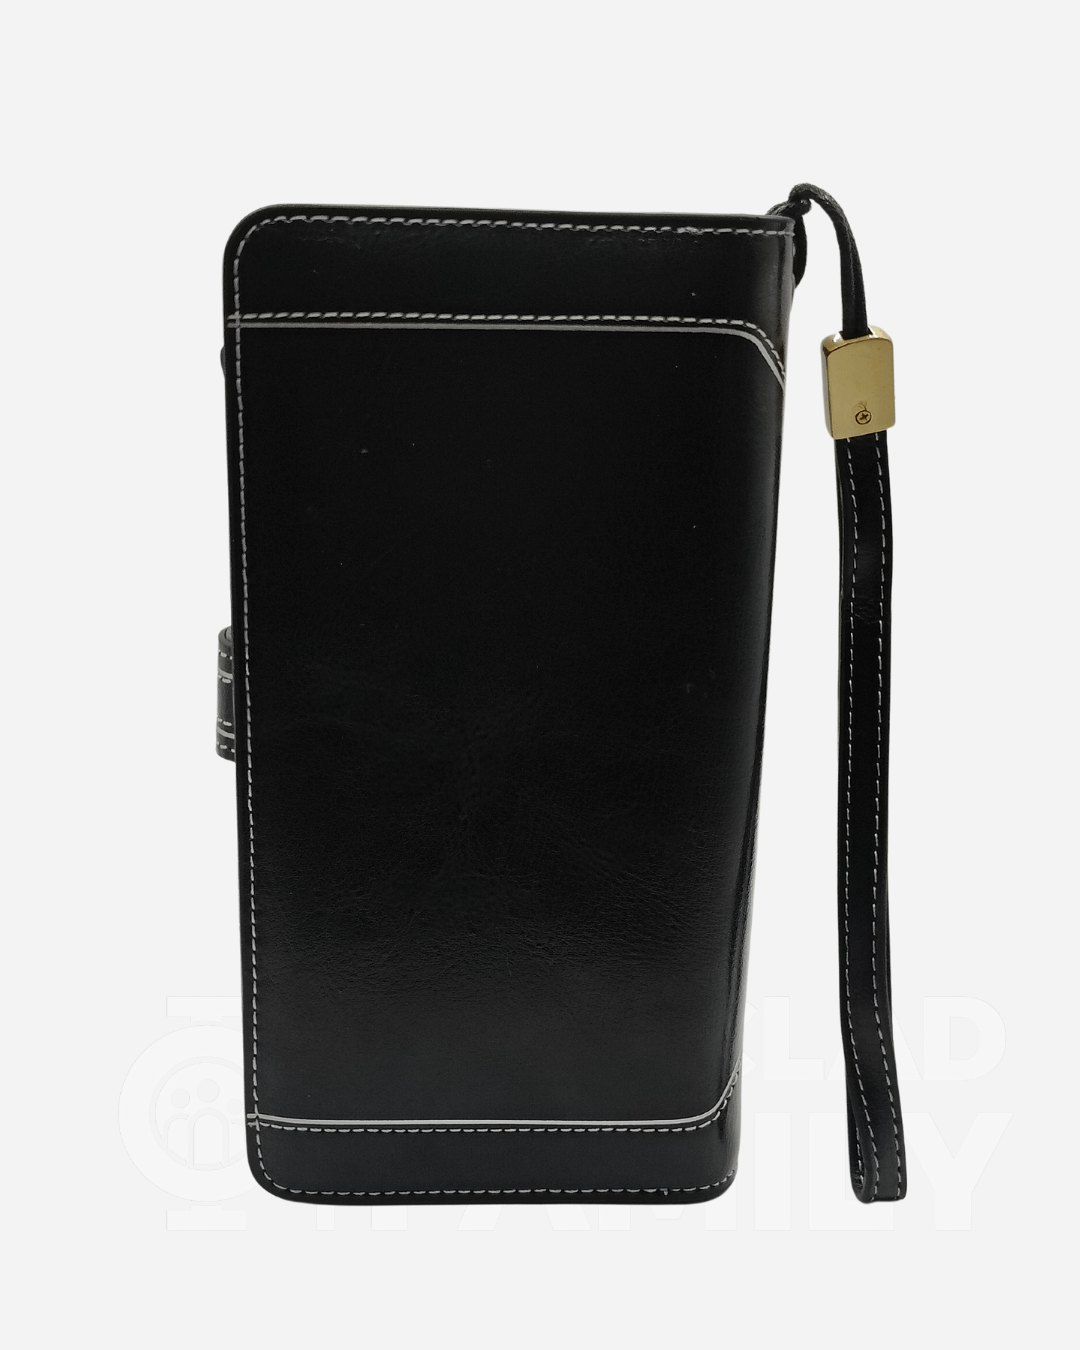 Black RFID Blocking Large Capacity Leather Wallet with a gold clasp feature